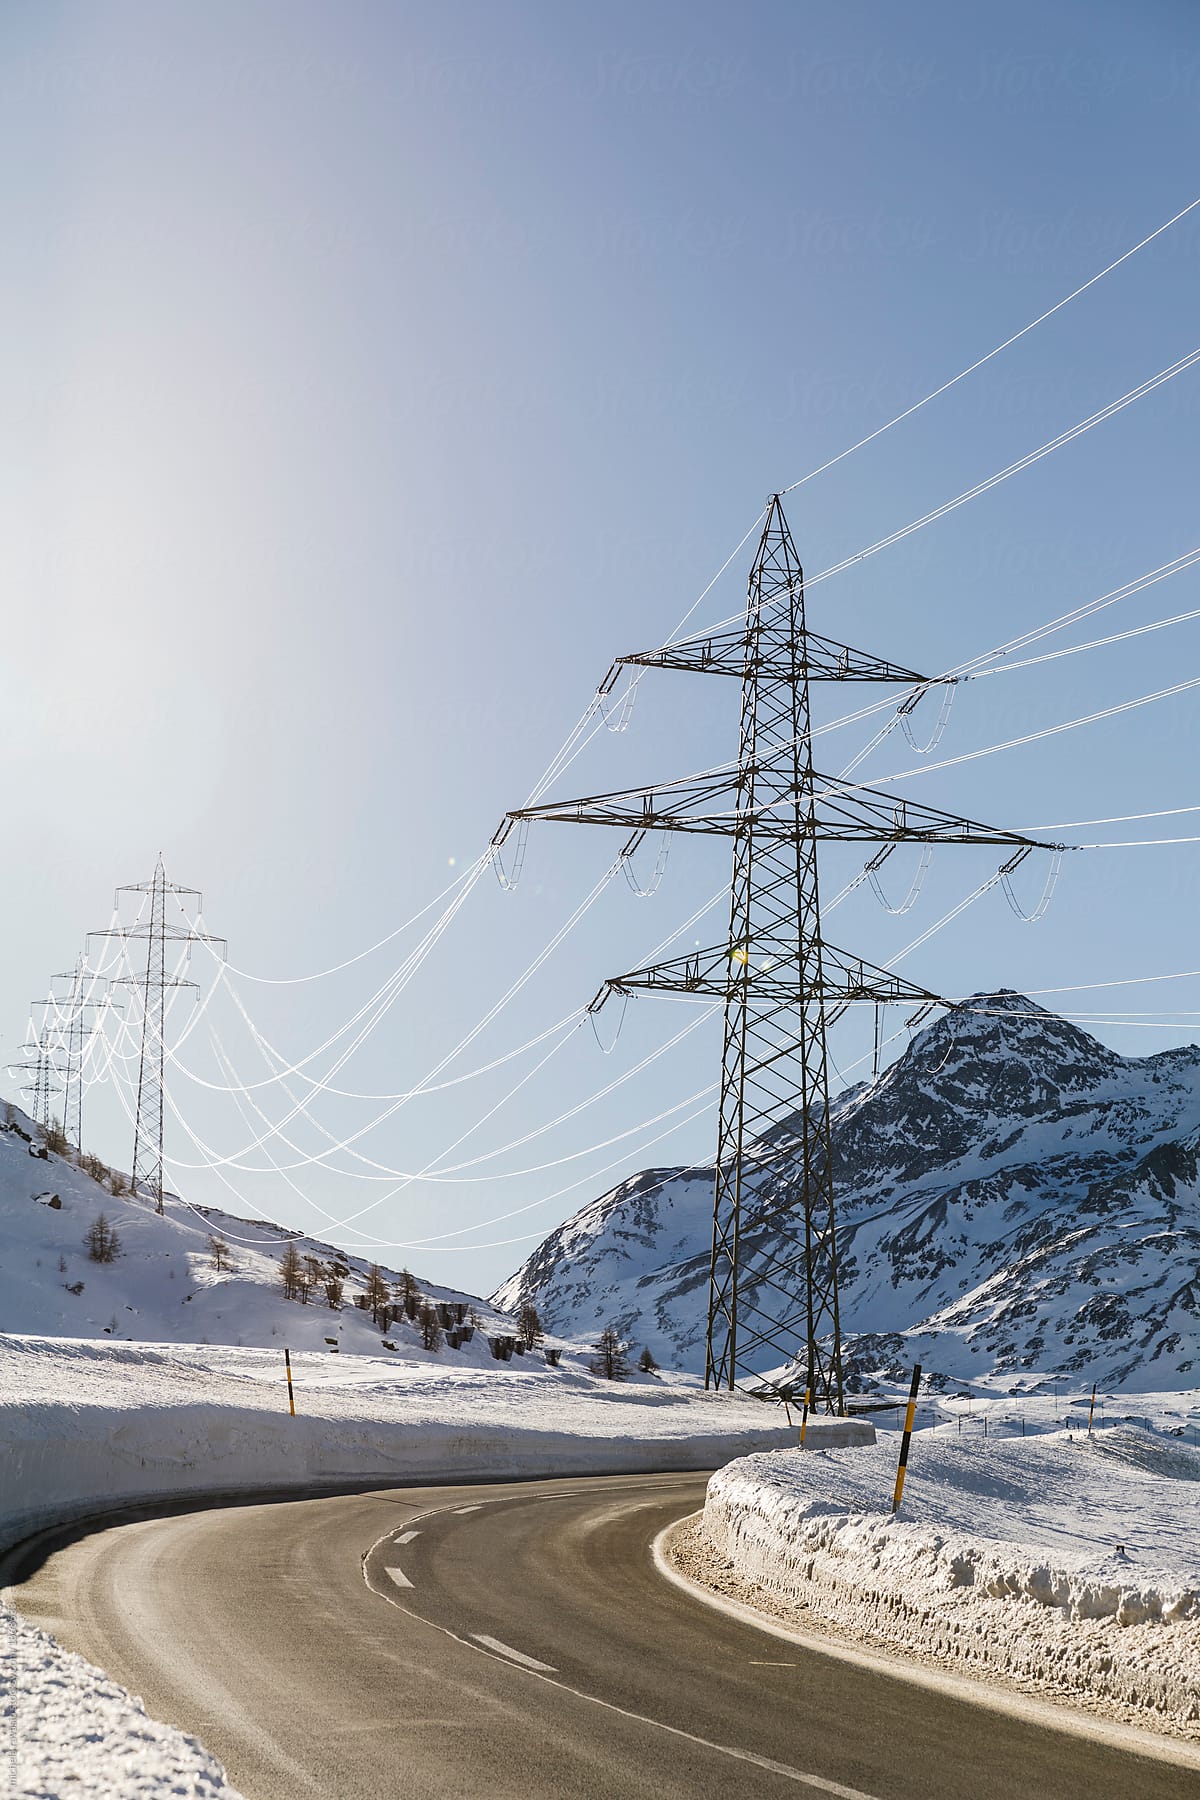 Power transmission lines in the mountain